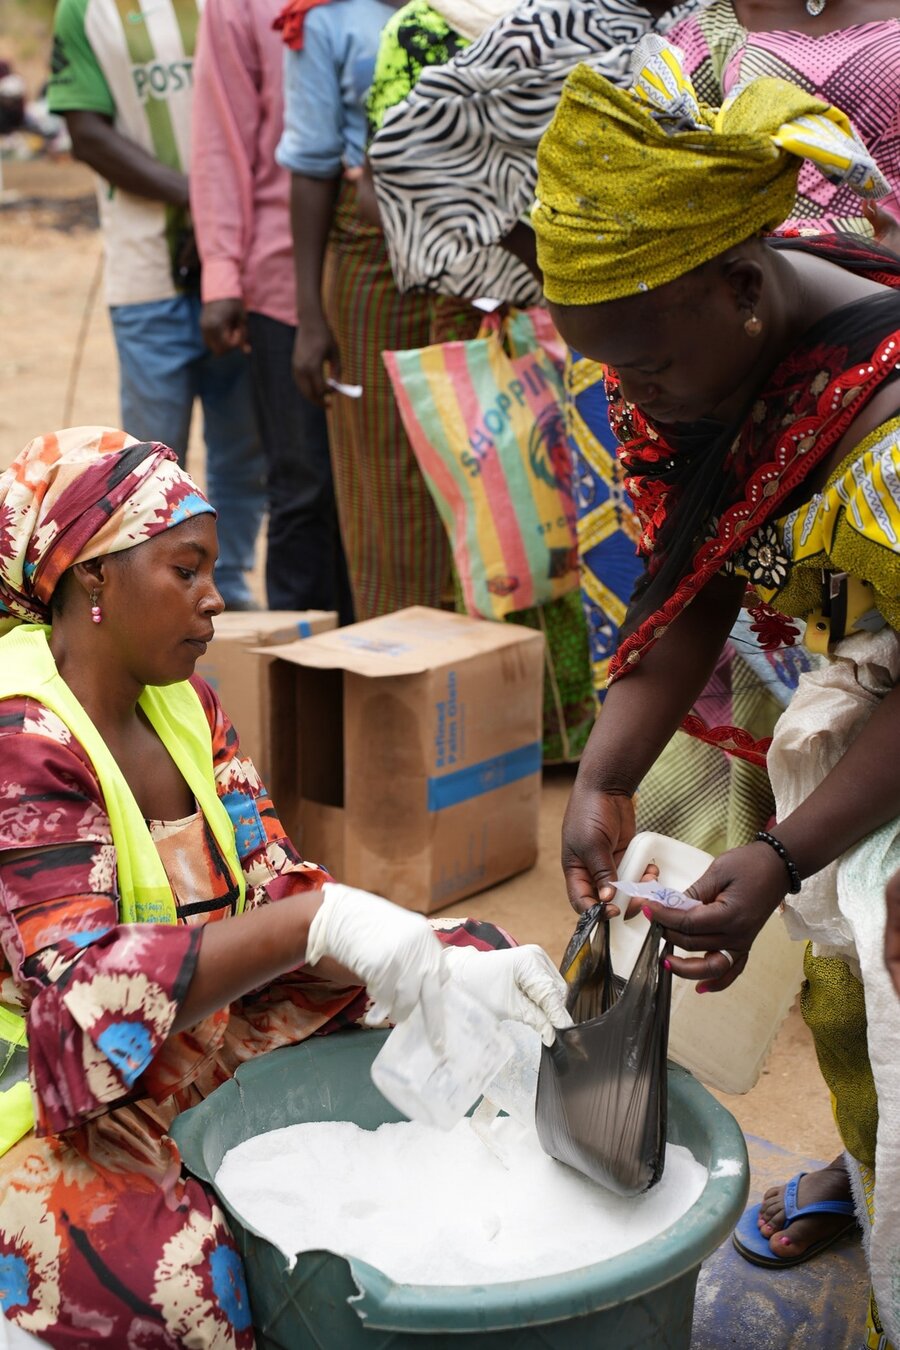 Chrisitina — an internally displaced person, buying food from the local market with the assistance from WFP.